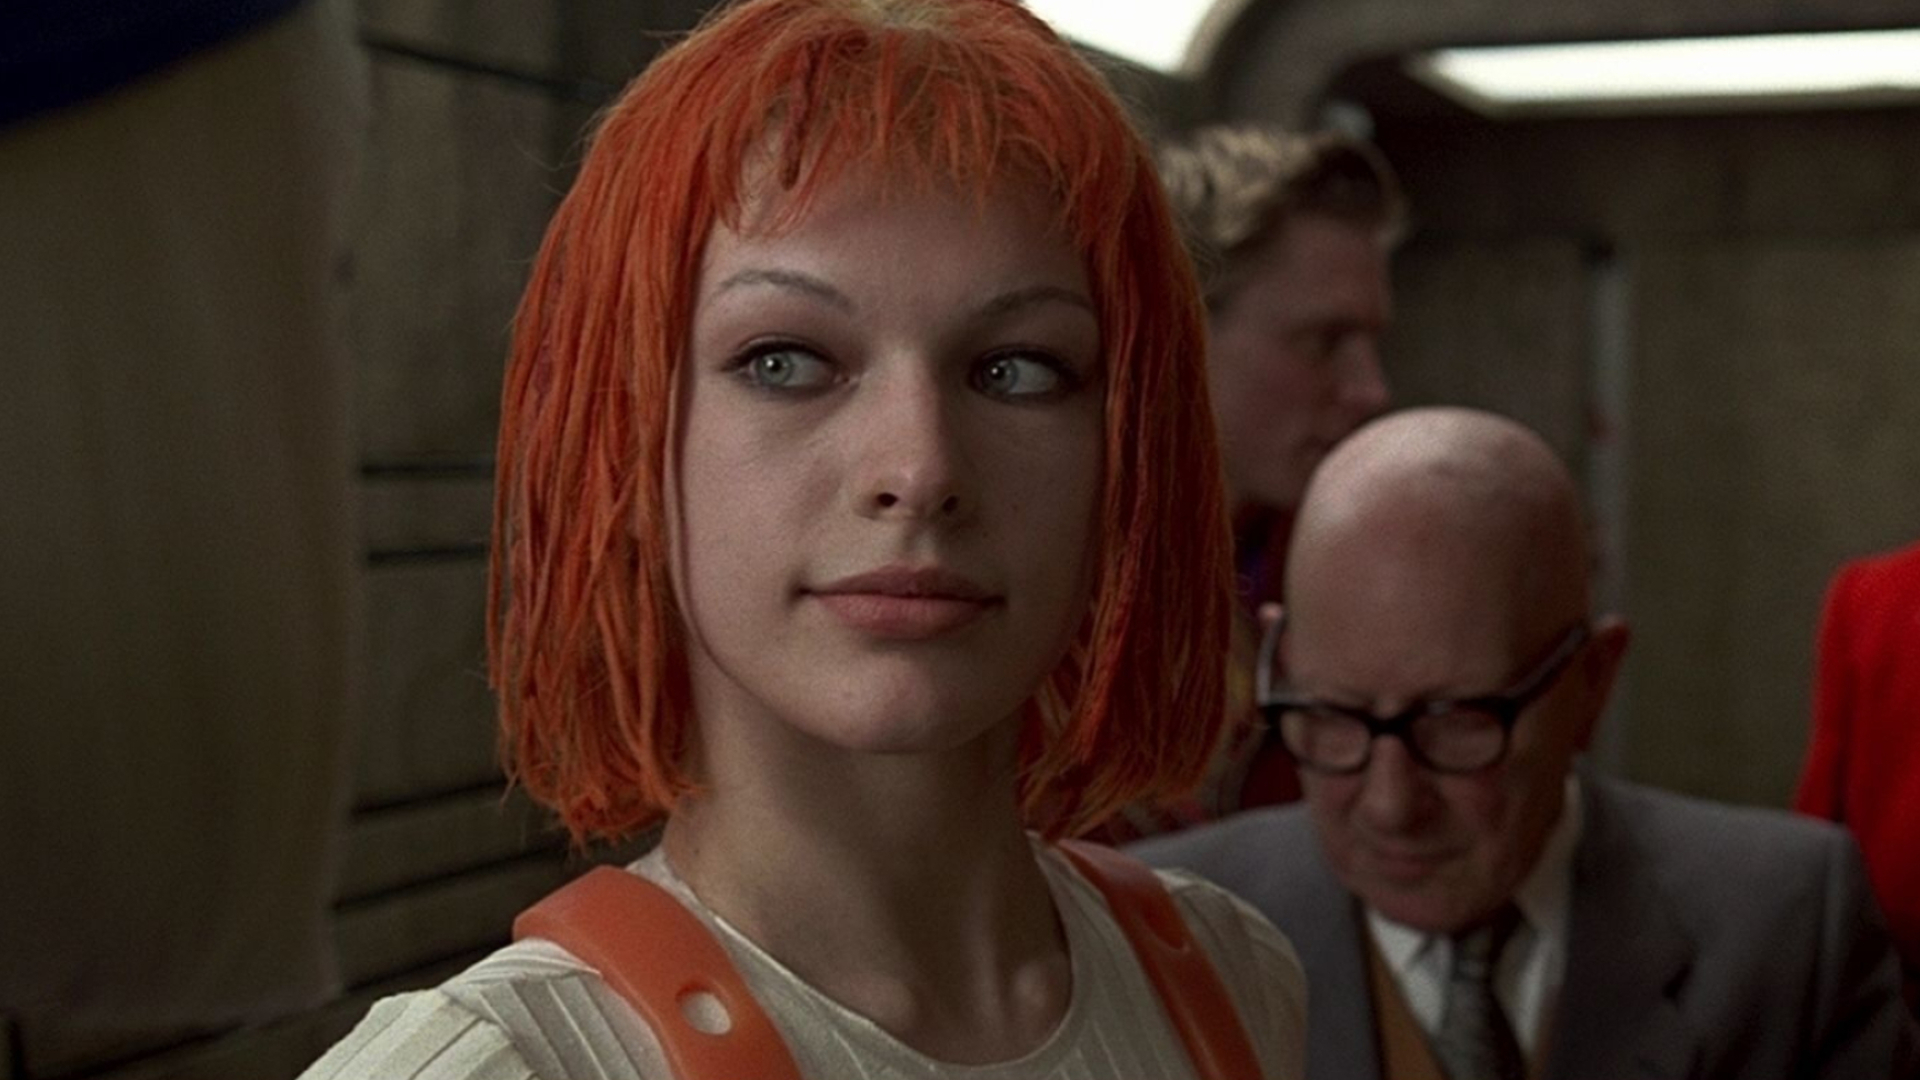 Milla Jovovich (The Fifth Element): Multipass, Forms a romantic connection with Korben Dallas. 1920x1080 Full HD Background.